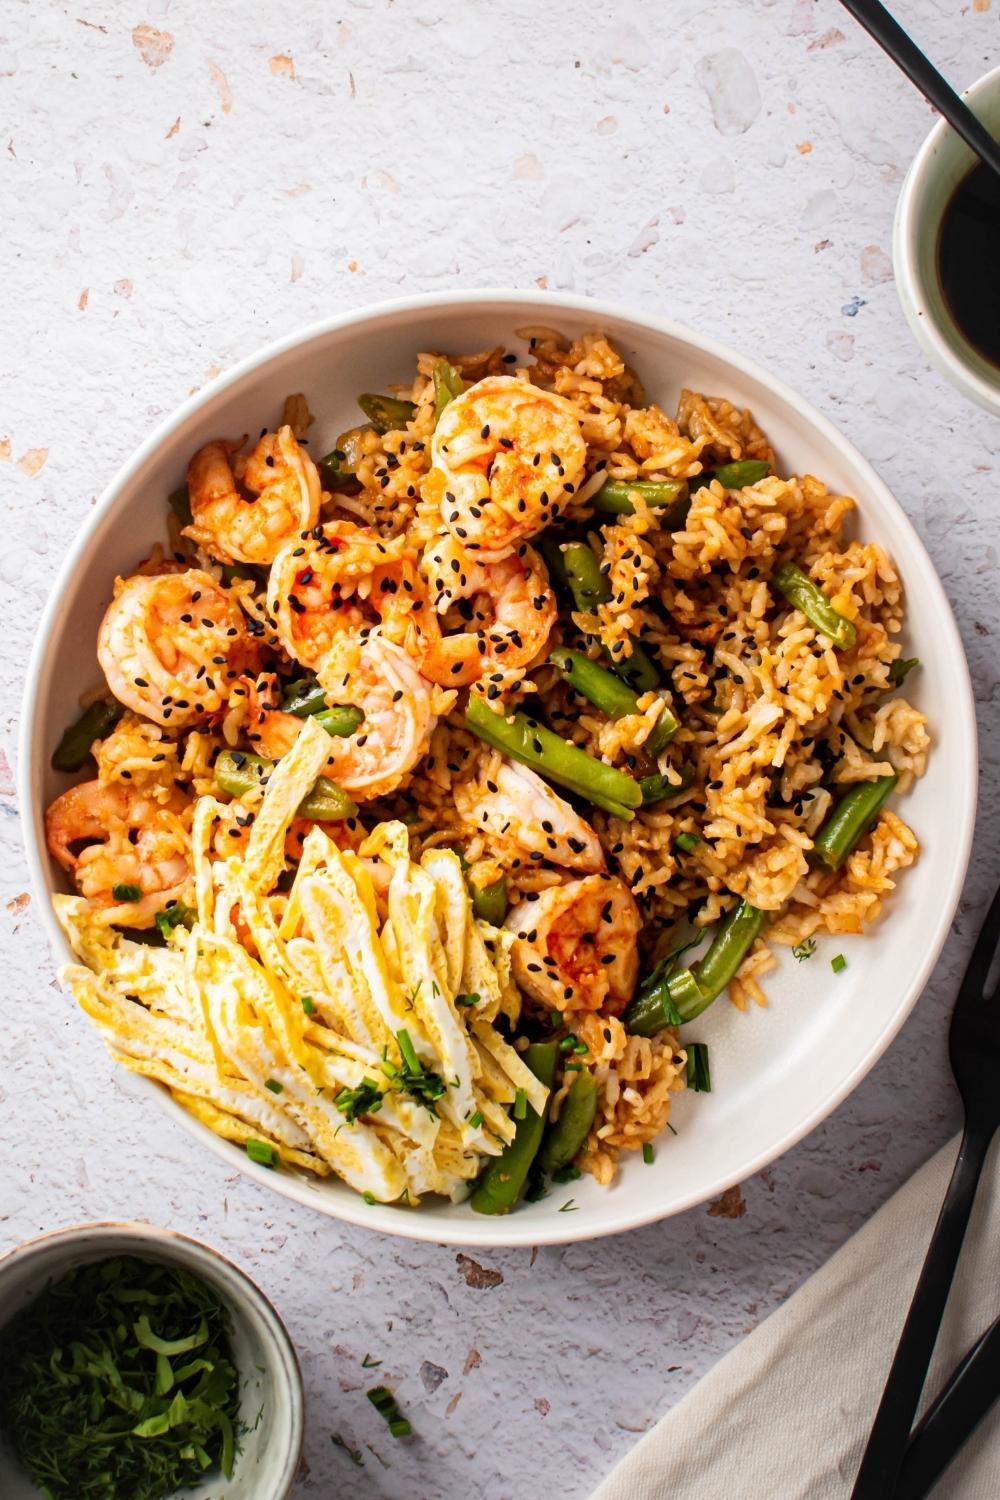 An overhead view of a bowl of Cajun Fried Rice with green beans, shrimp, and egg.